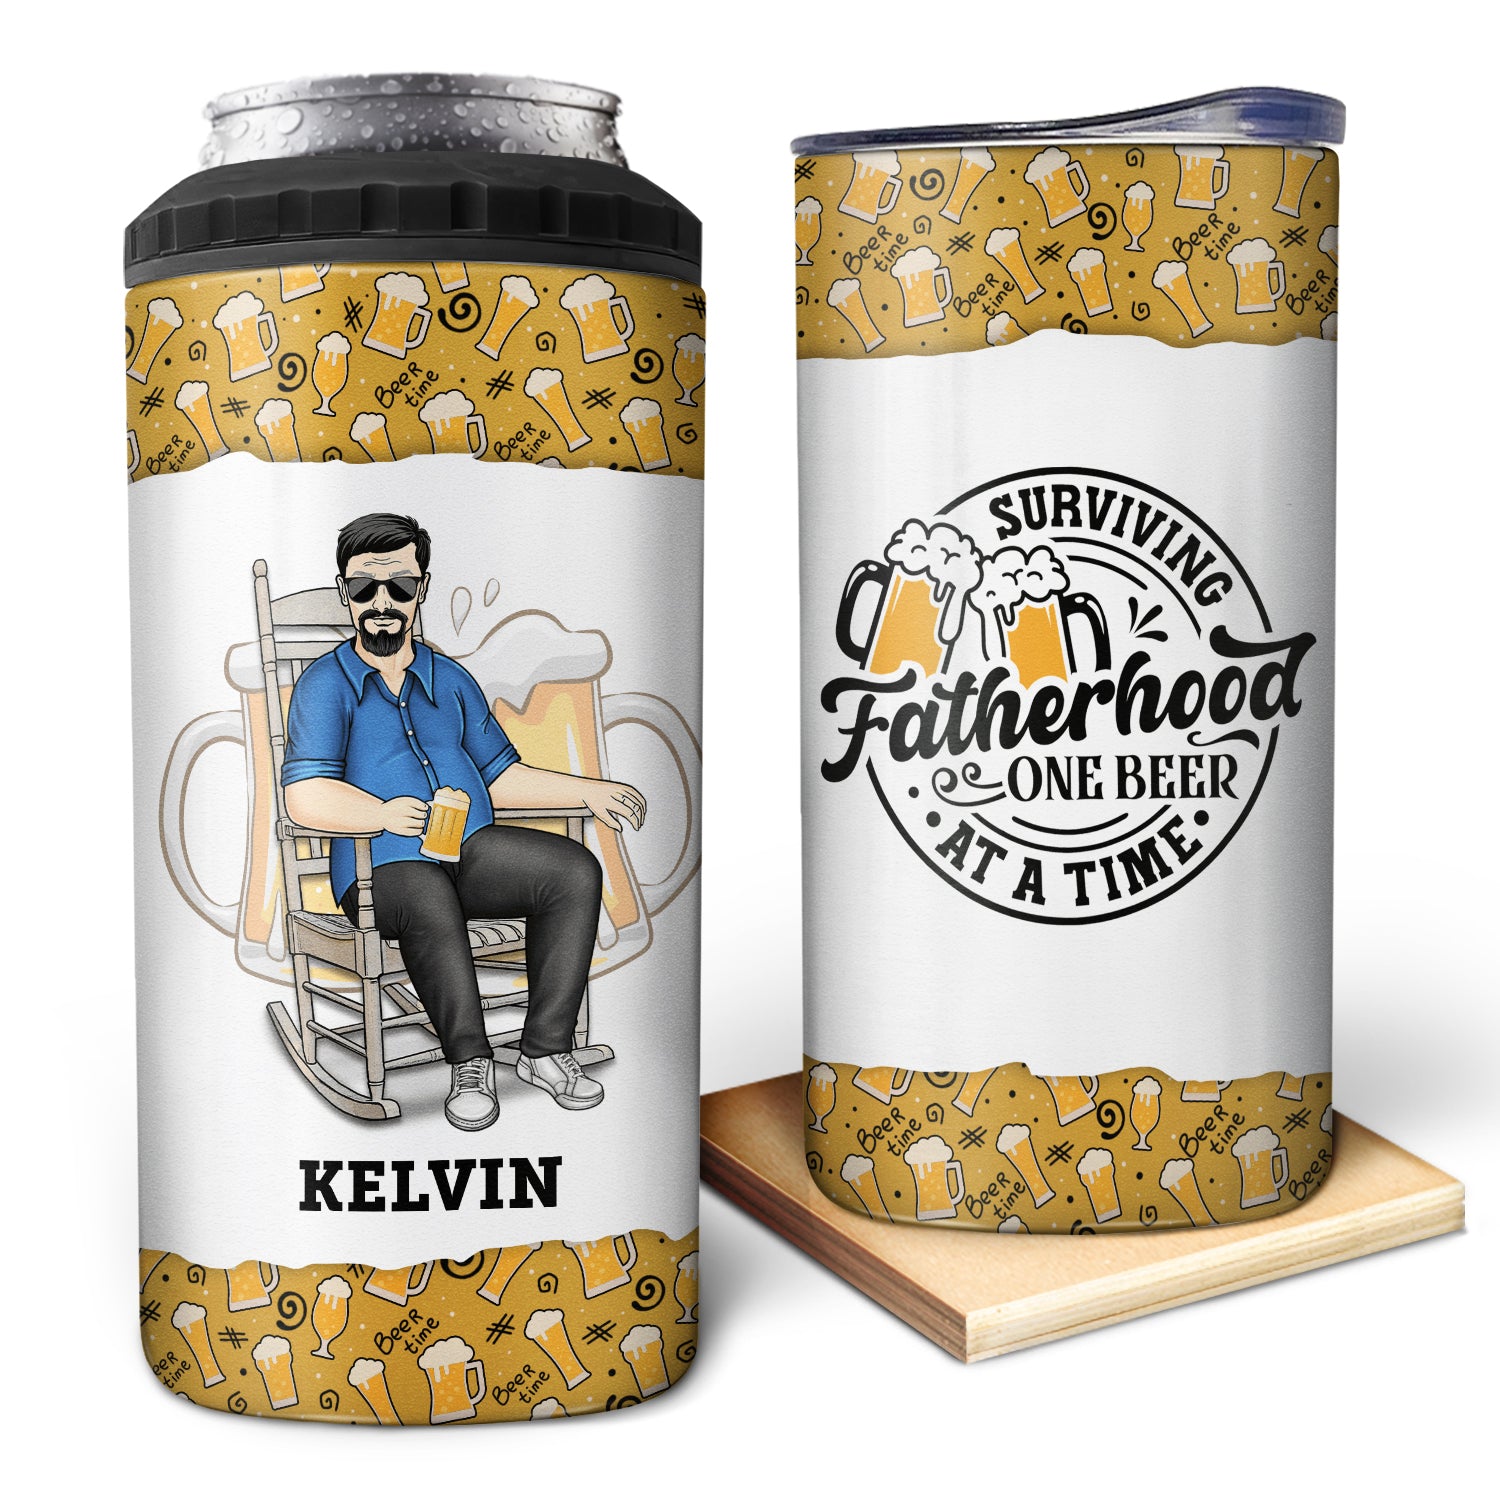 Surviving Fatherhood One Beer At A Time - Gift For Father, Dad - Personalized 4 In 1 Can Cooler